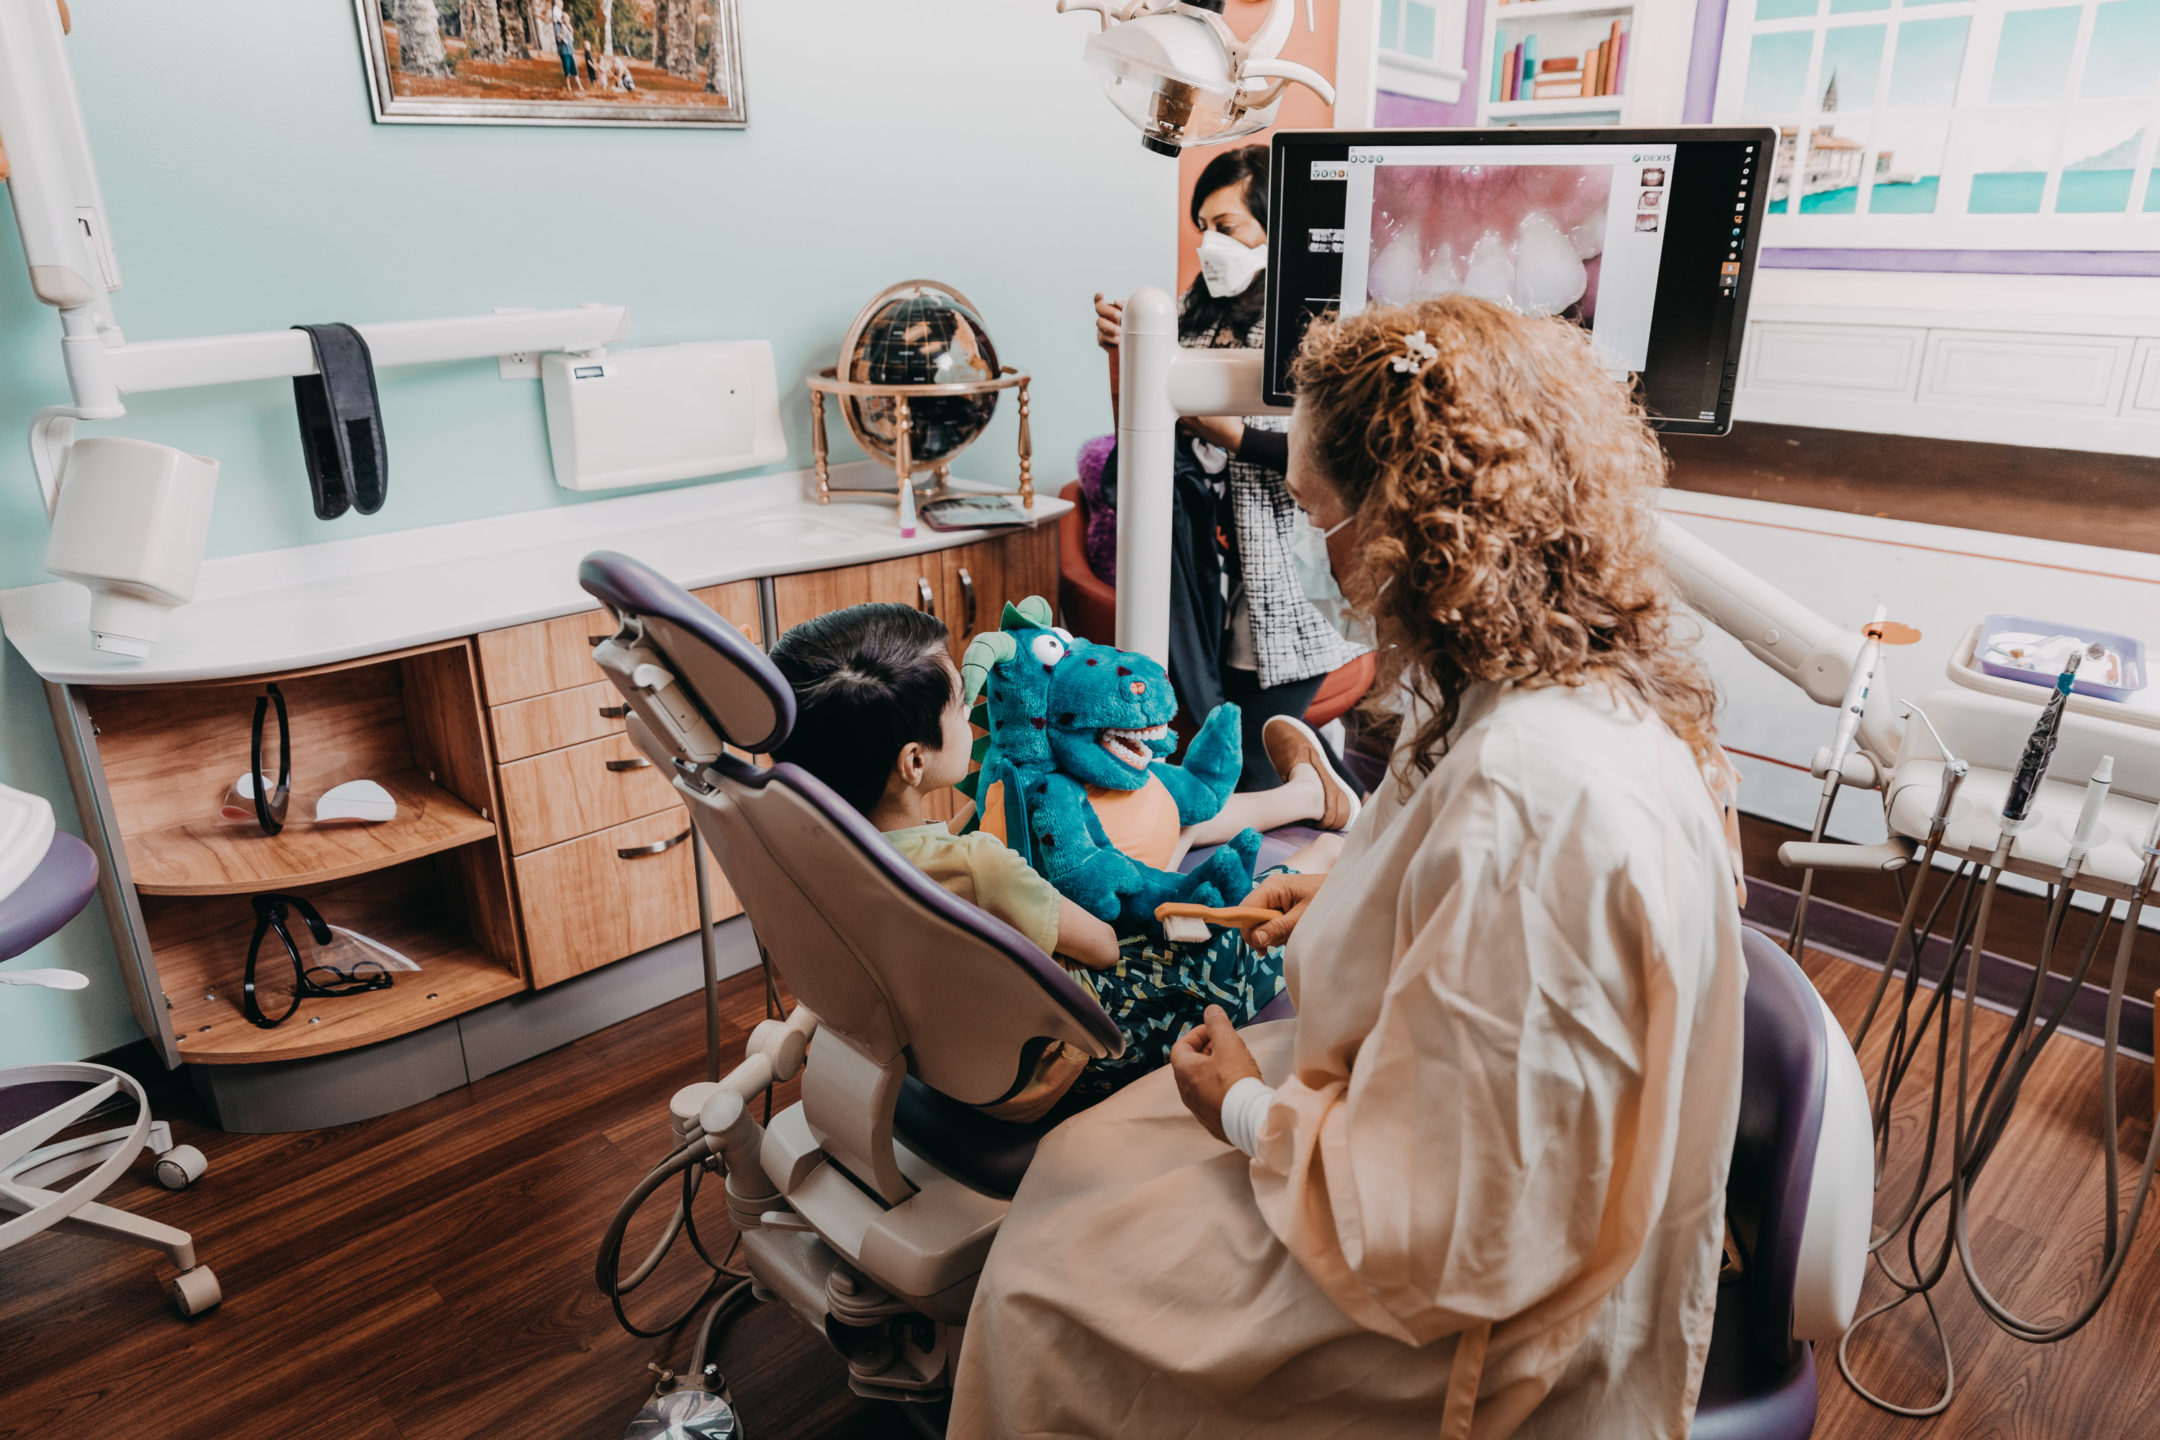 A child sits in the dental chair holding a stuffed toy and looking at an image of his teeth as a dentist sits next to him.